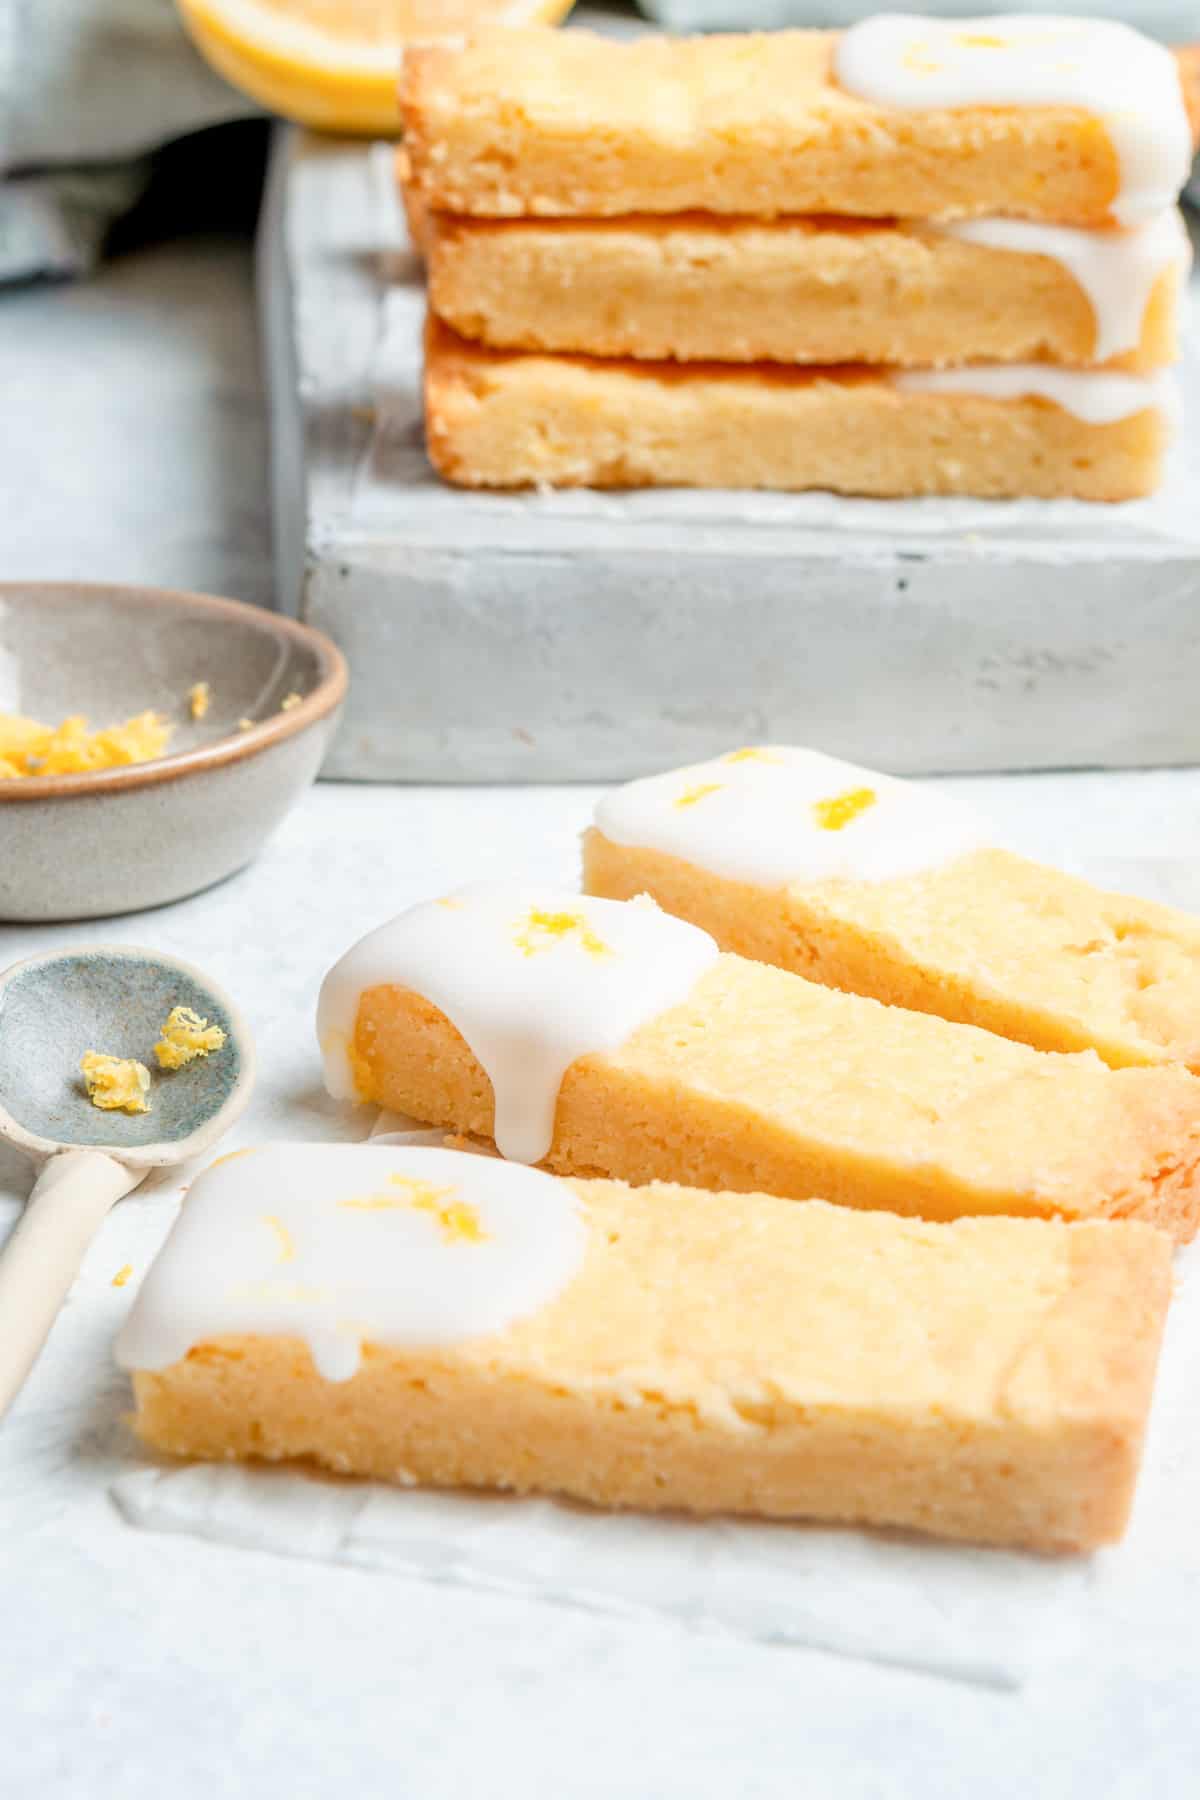 lemon shortbread cookies cut into thin rectangles, with icing drizzled on the ends